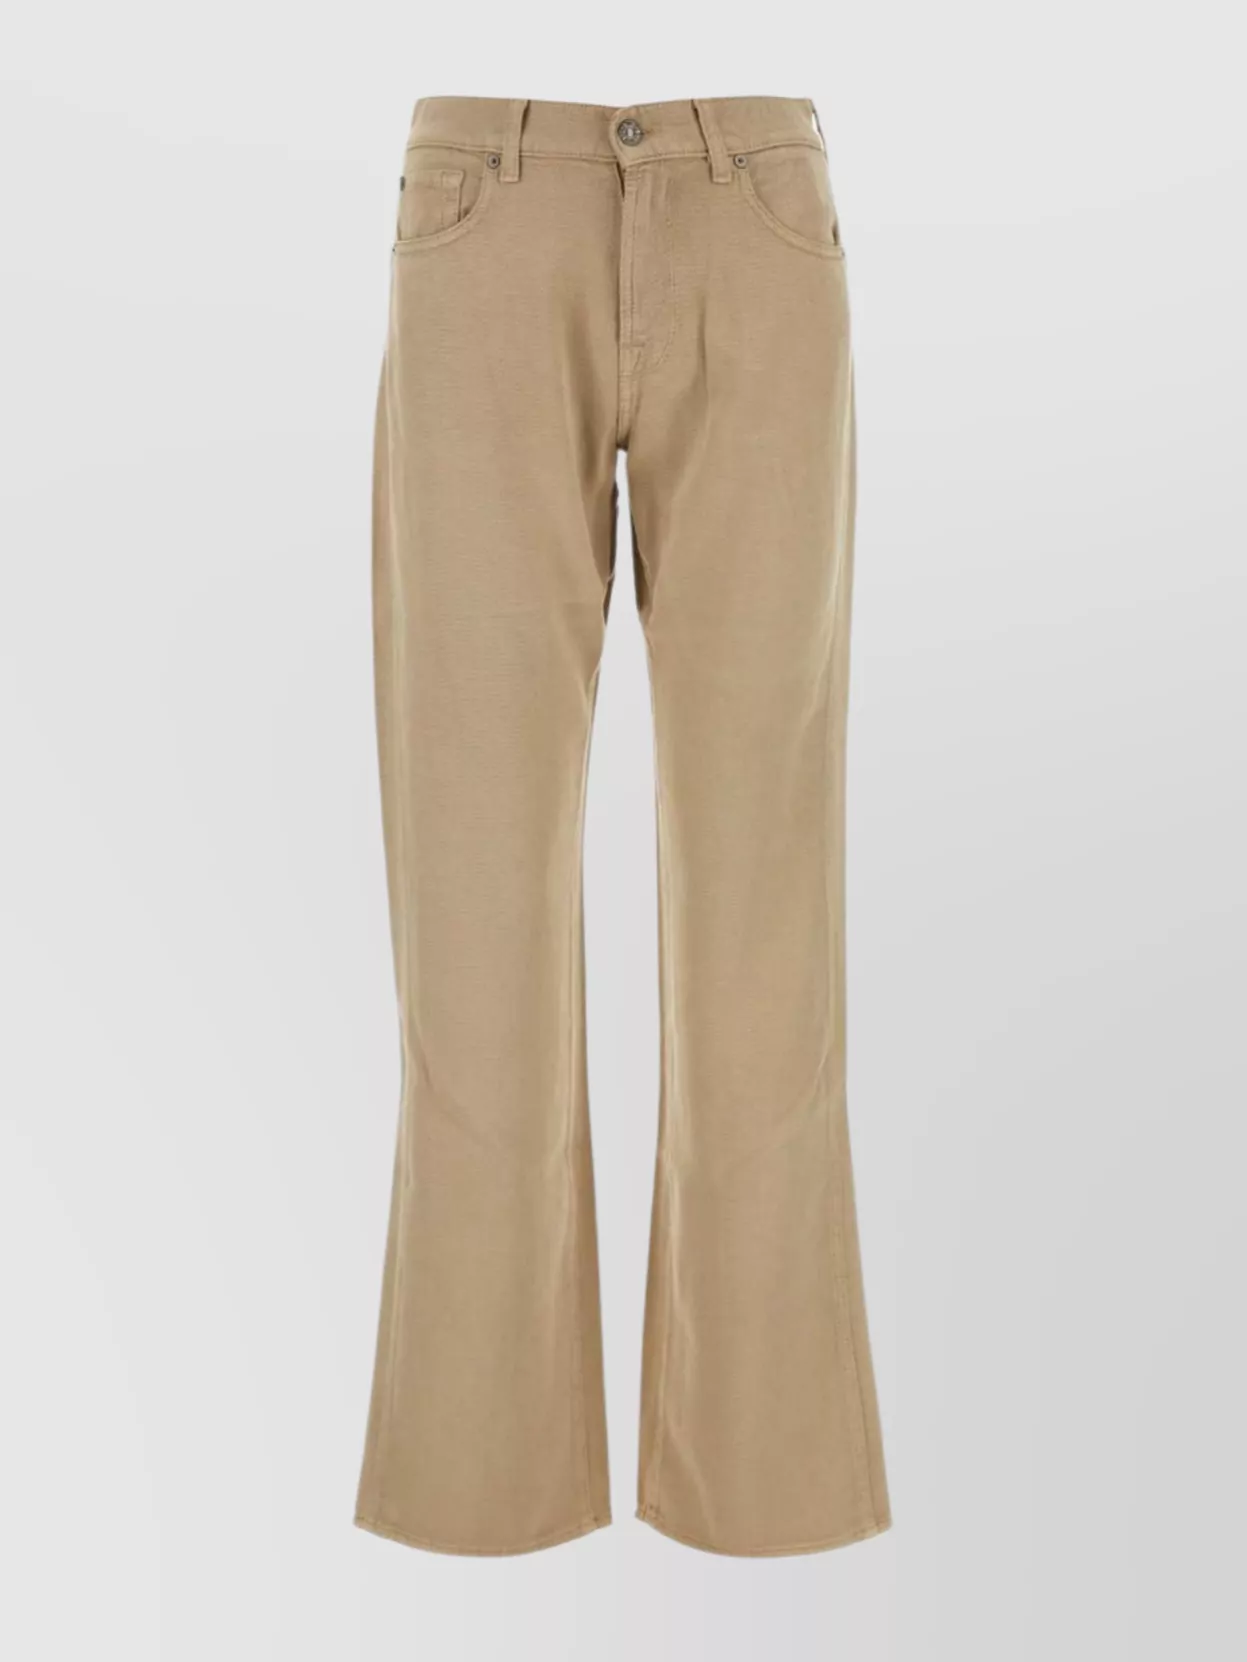 Shop 7 For All Mankind Tess Flared Trousers With Belt Loops And Back Pockets